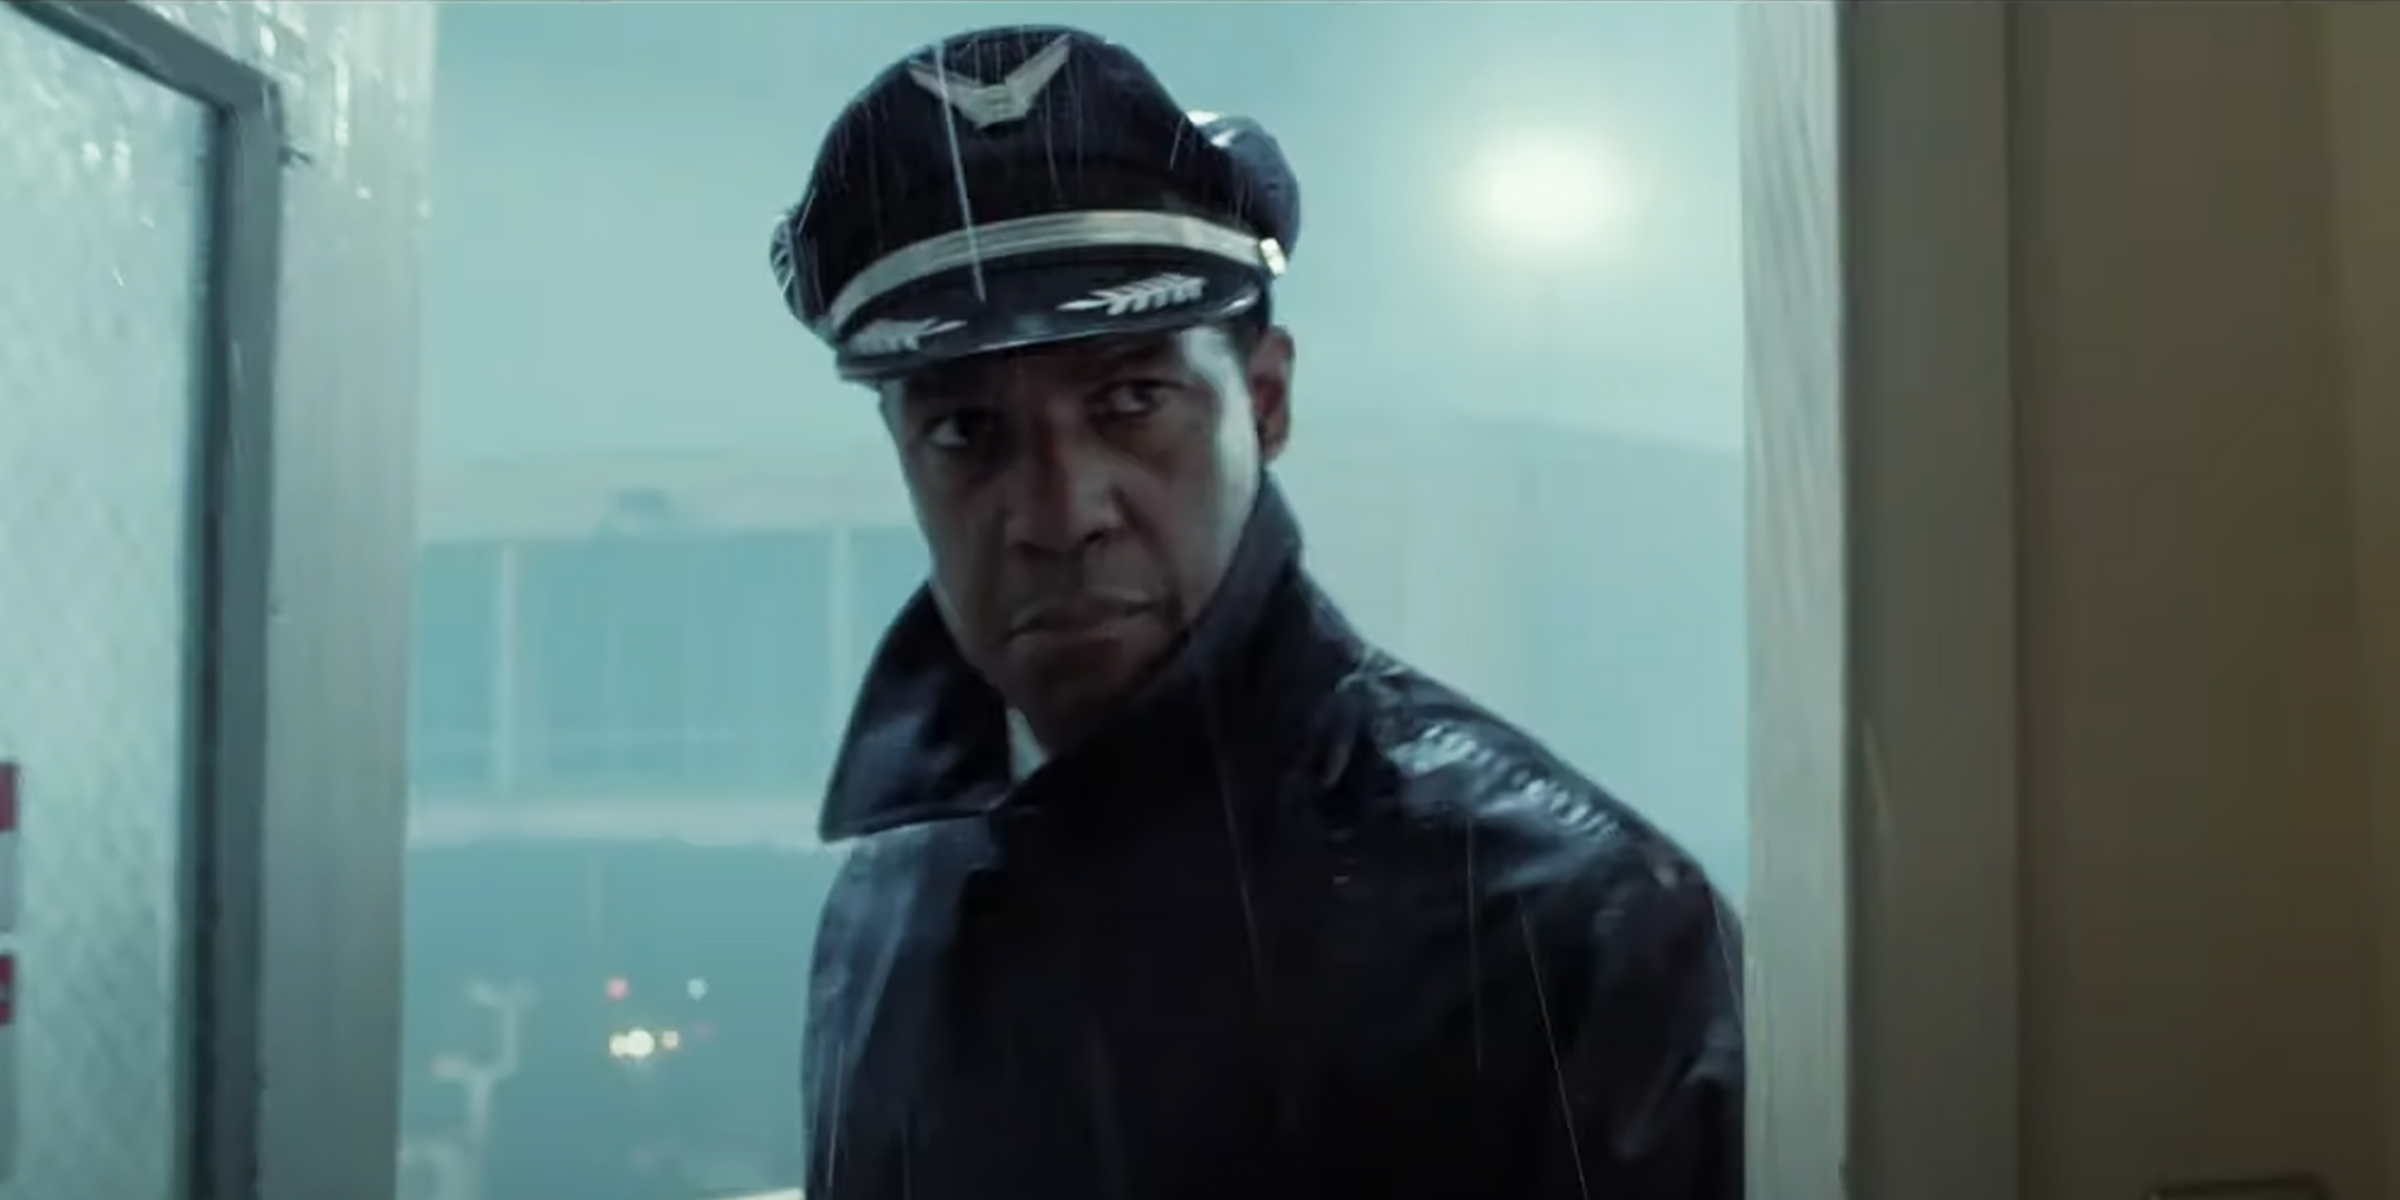 Denzel Washington as Whip Whitaker in "Flight." | Source: YouTube/Paramount Pictures